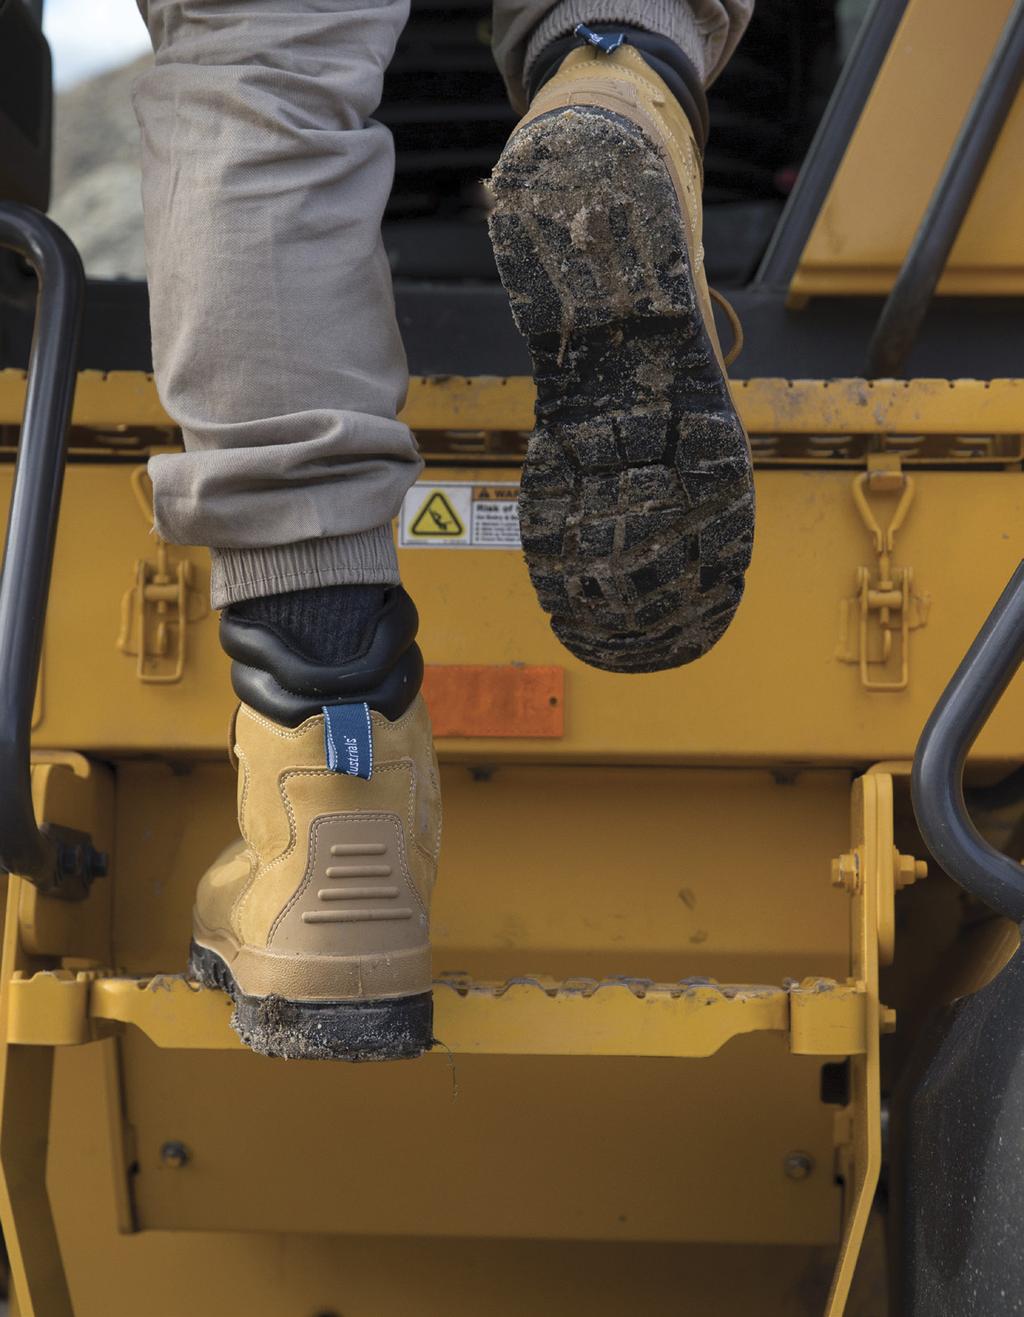 HeLIX RAnGe BRINGING SHOCK ABSORPTION TO A NEW LEVEL Helix safety work boots have it all.